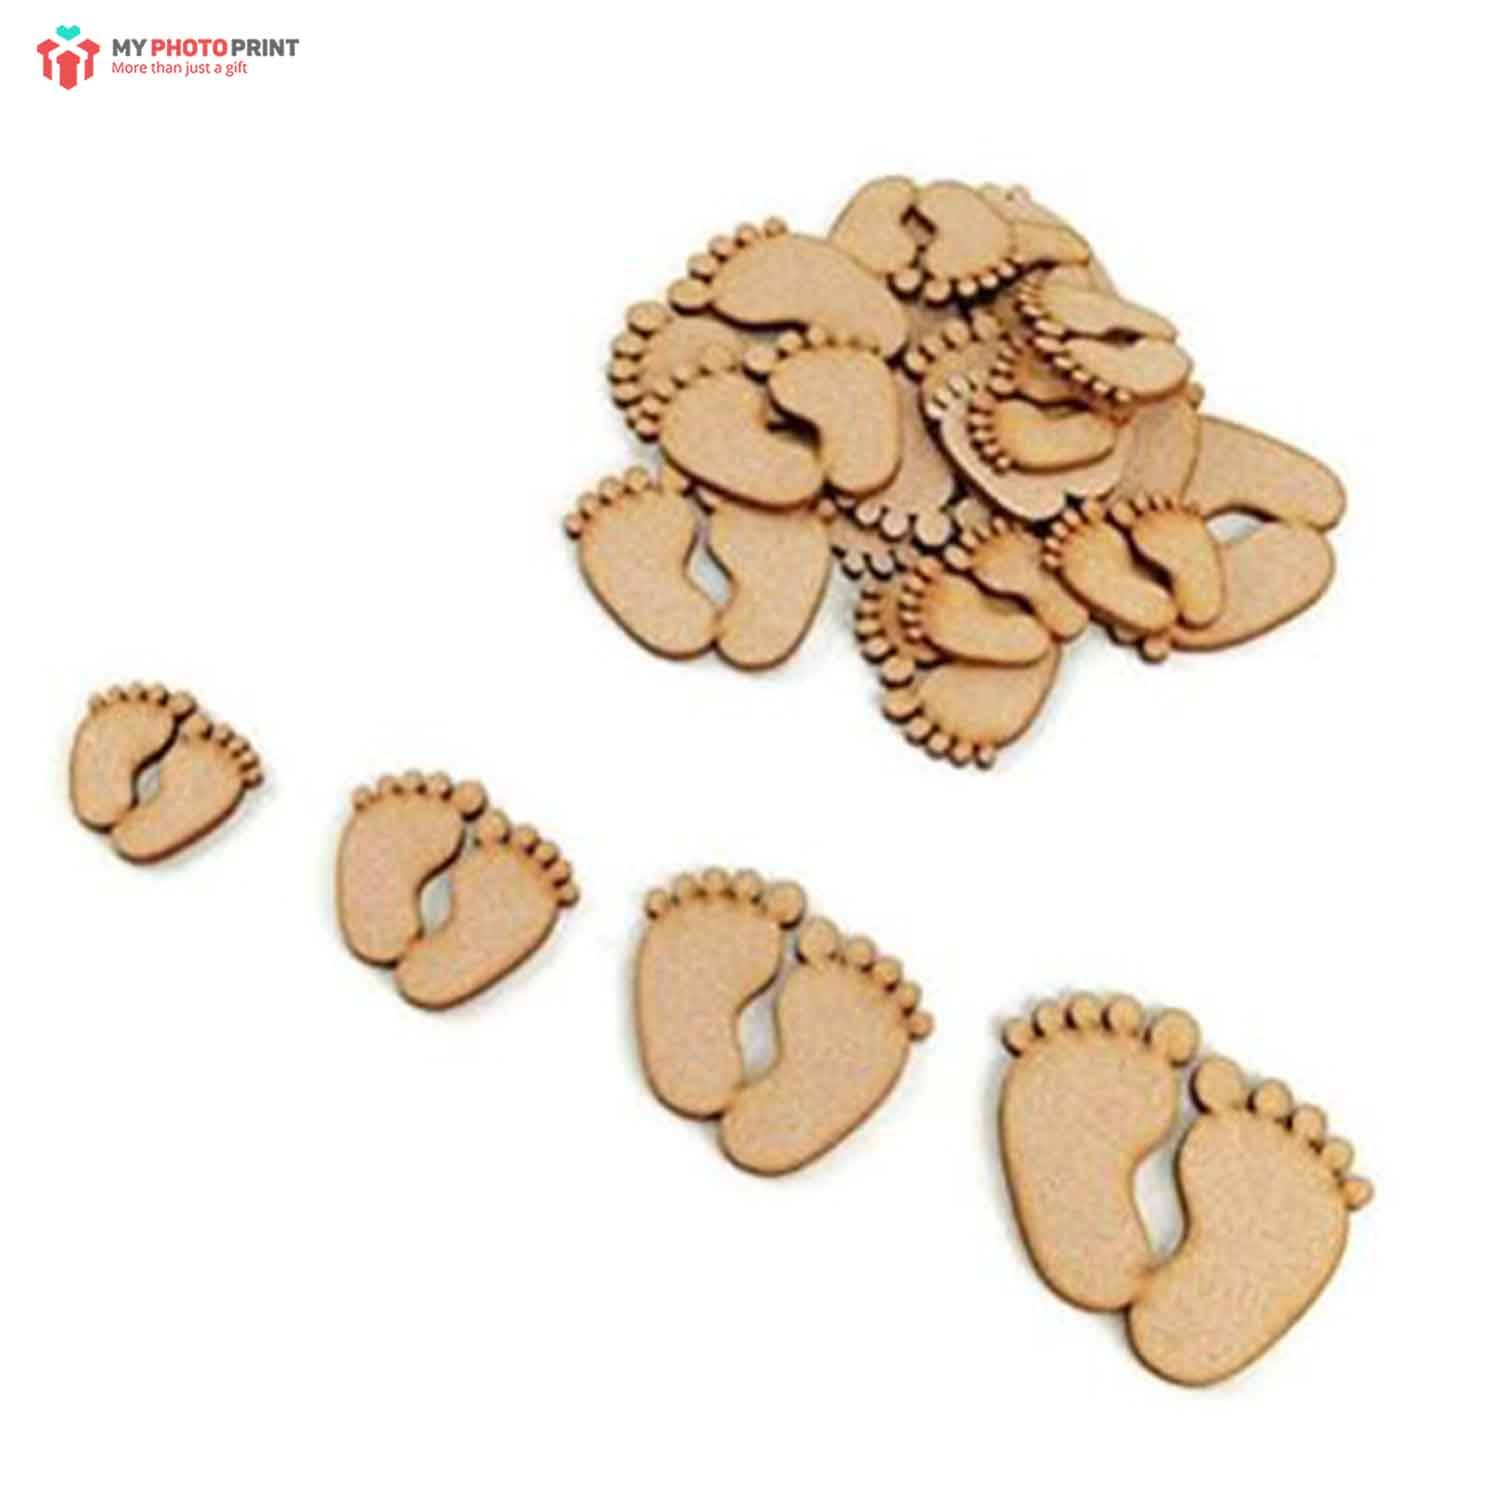 Cute Baby Feet Craft Shapes MDF Wooden Craft Cutout Shapes & Patterns - DIY SET OF 10